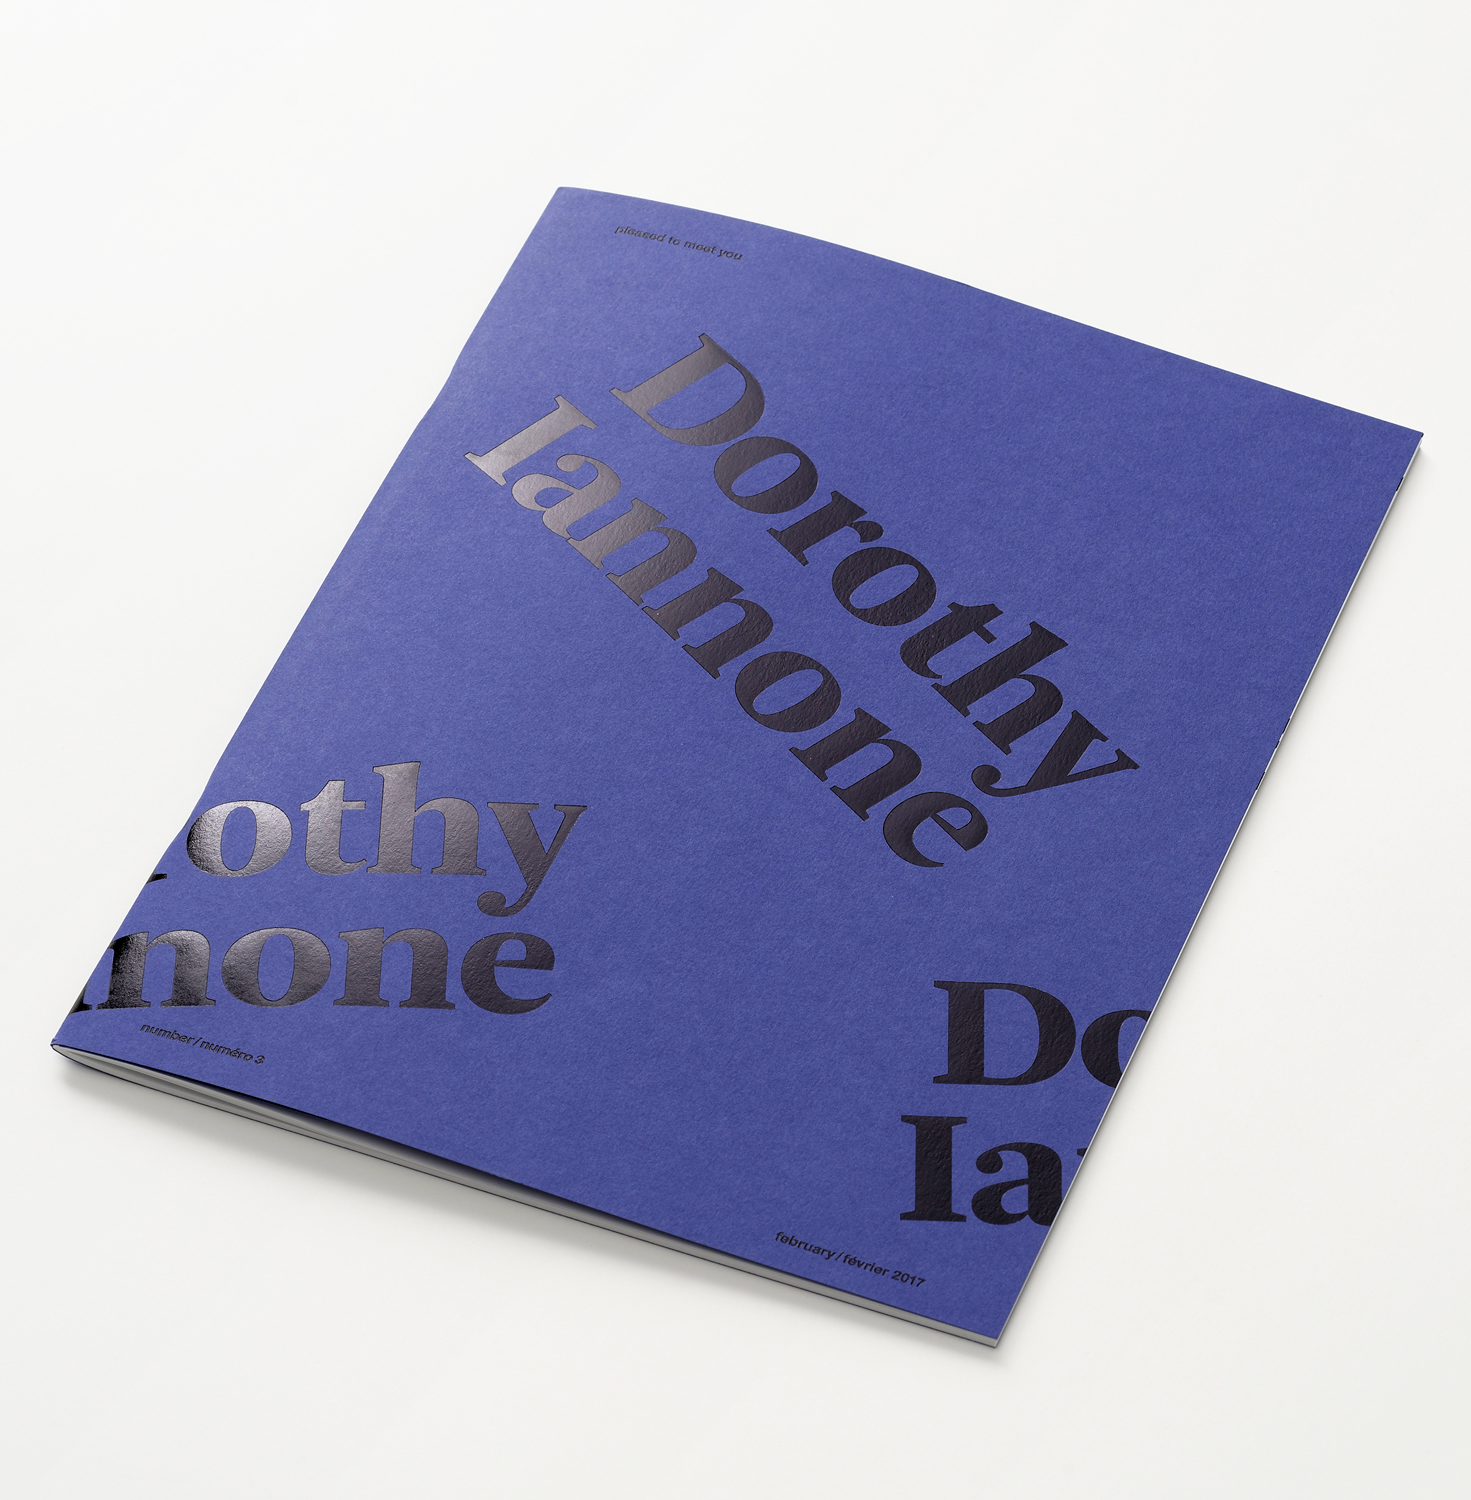 Pleased to meet you #3 - Dorothy Iannone